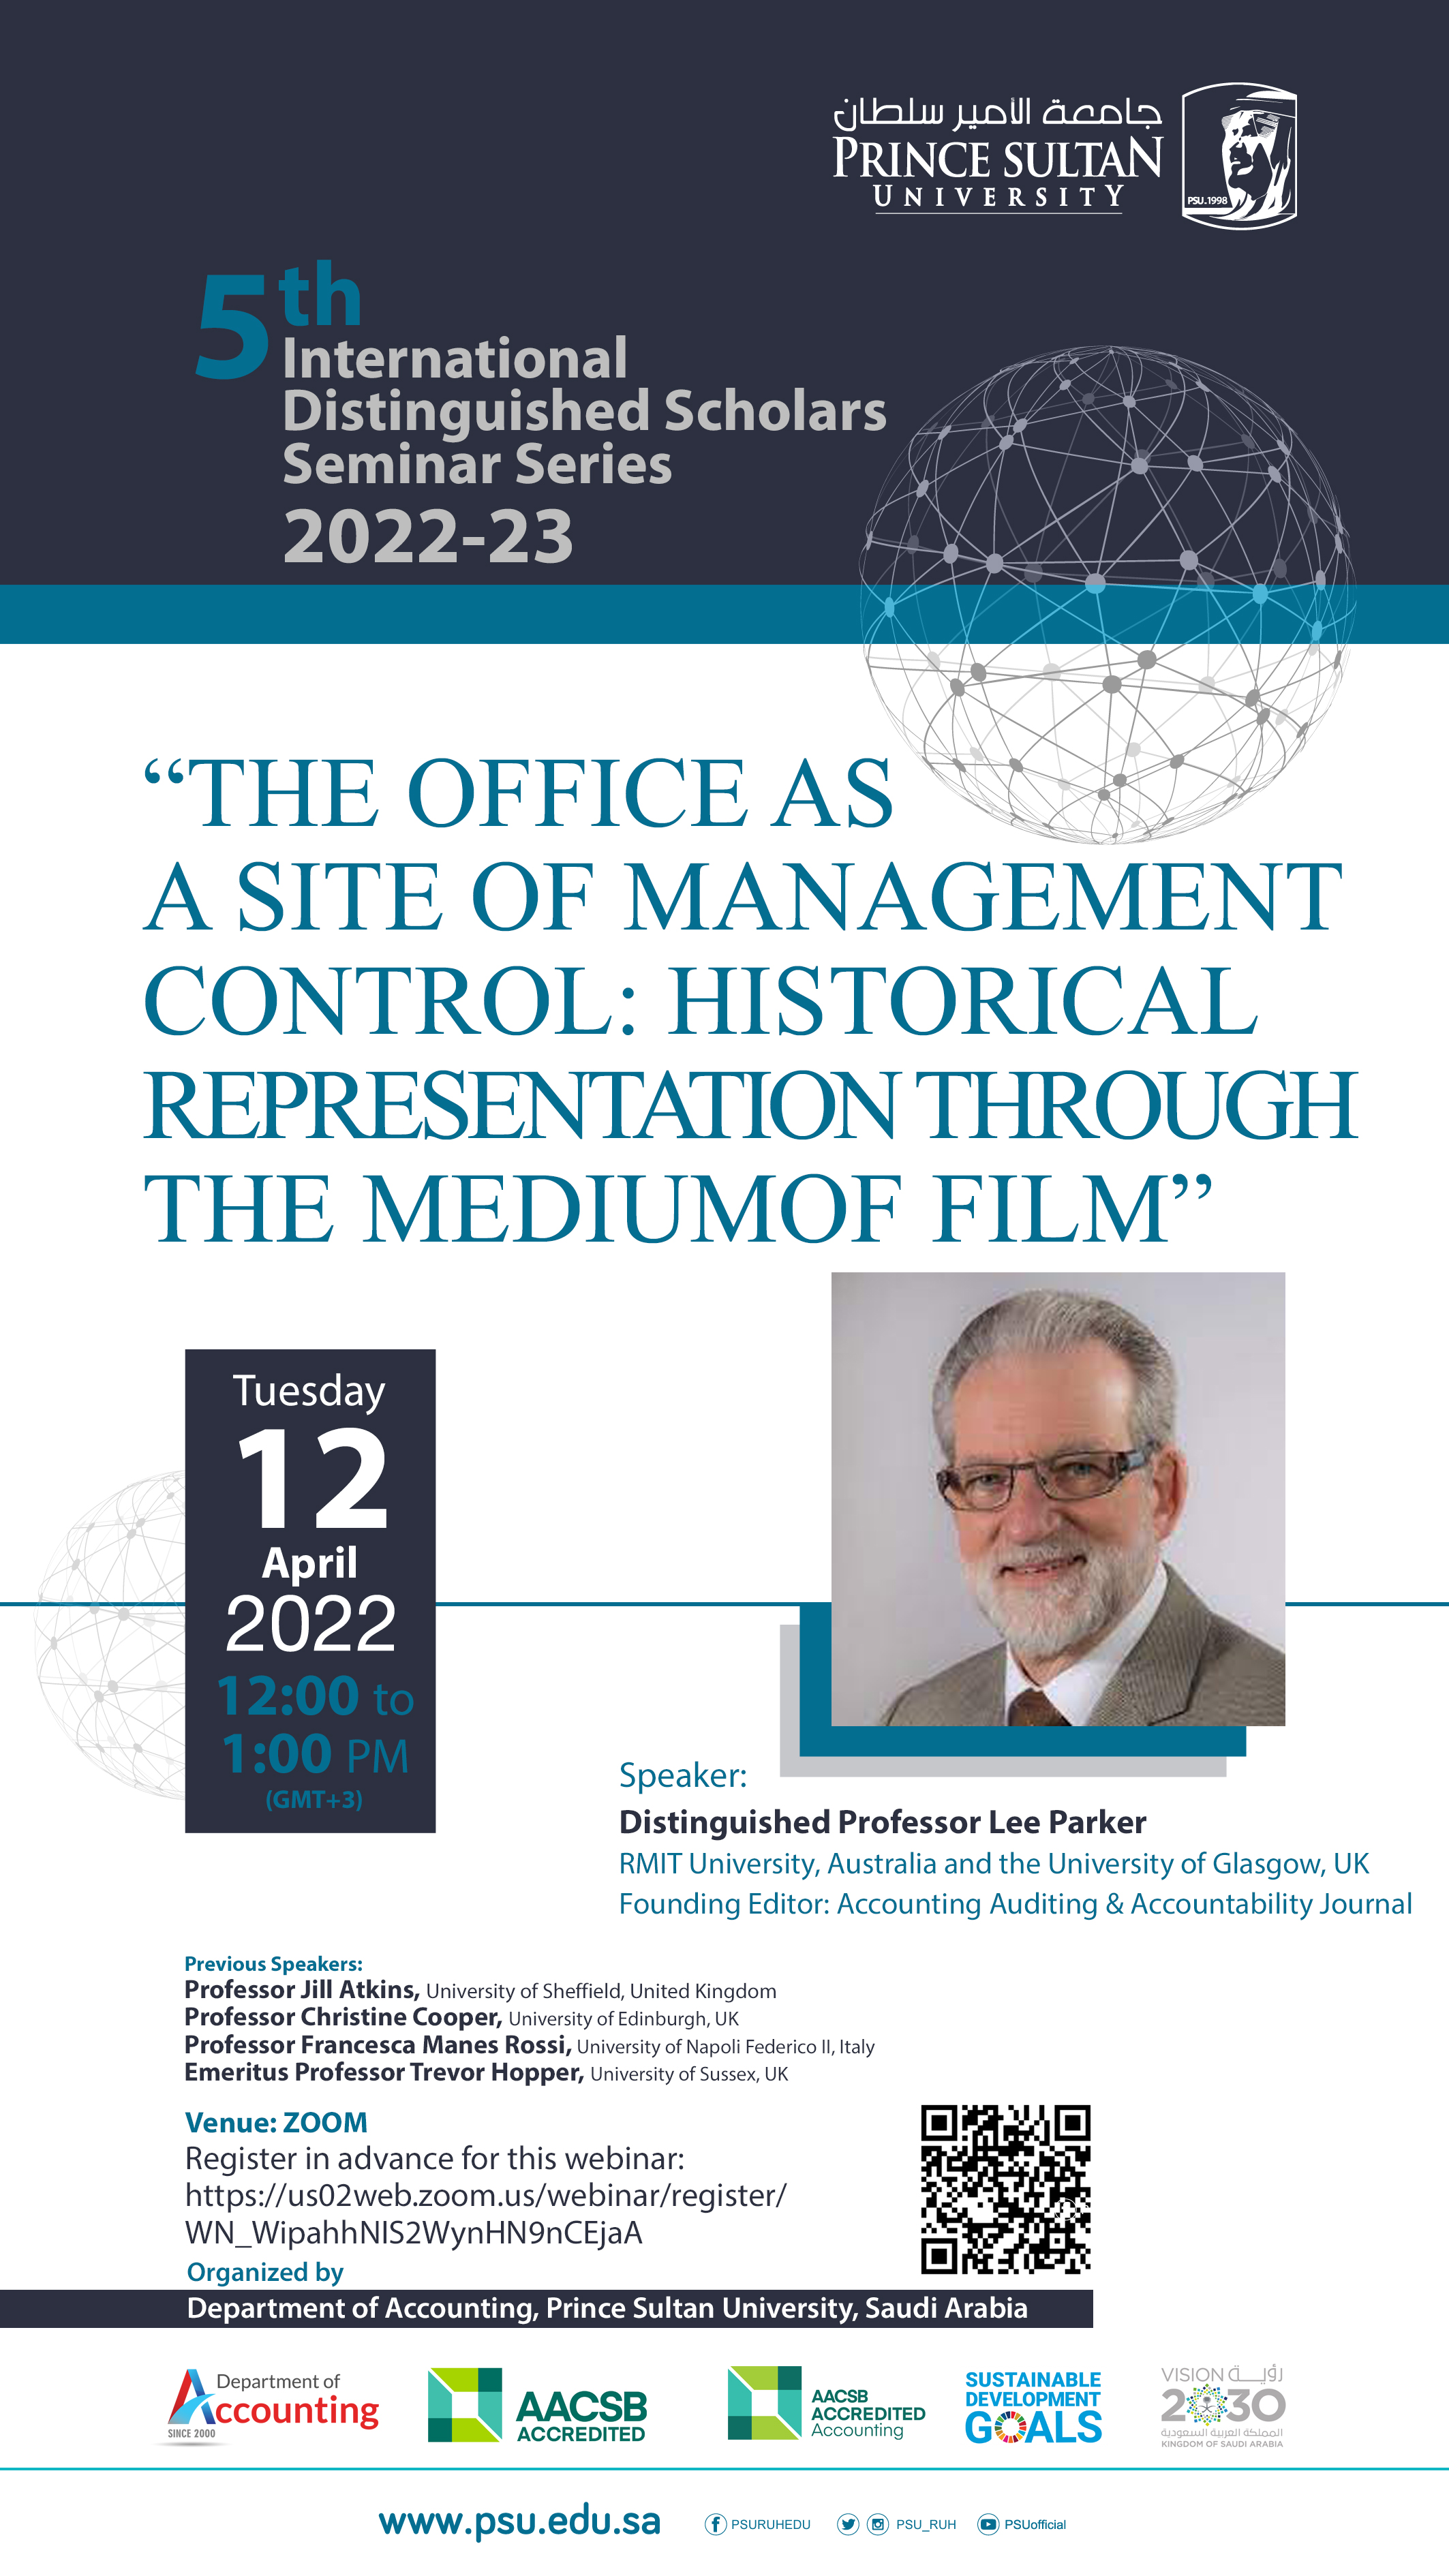 The Office as a Site of Management Control: Historical Representation through the Medium of Film